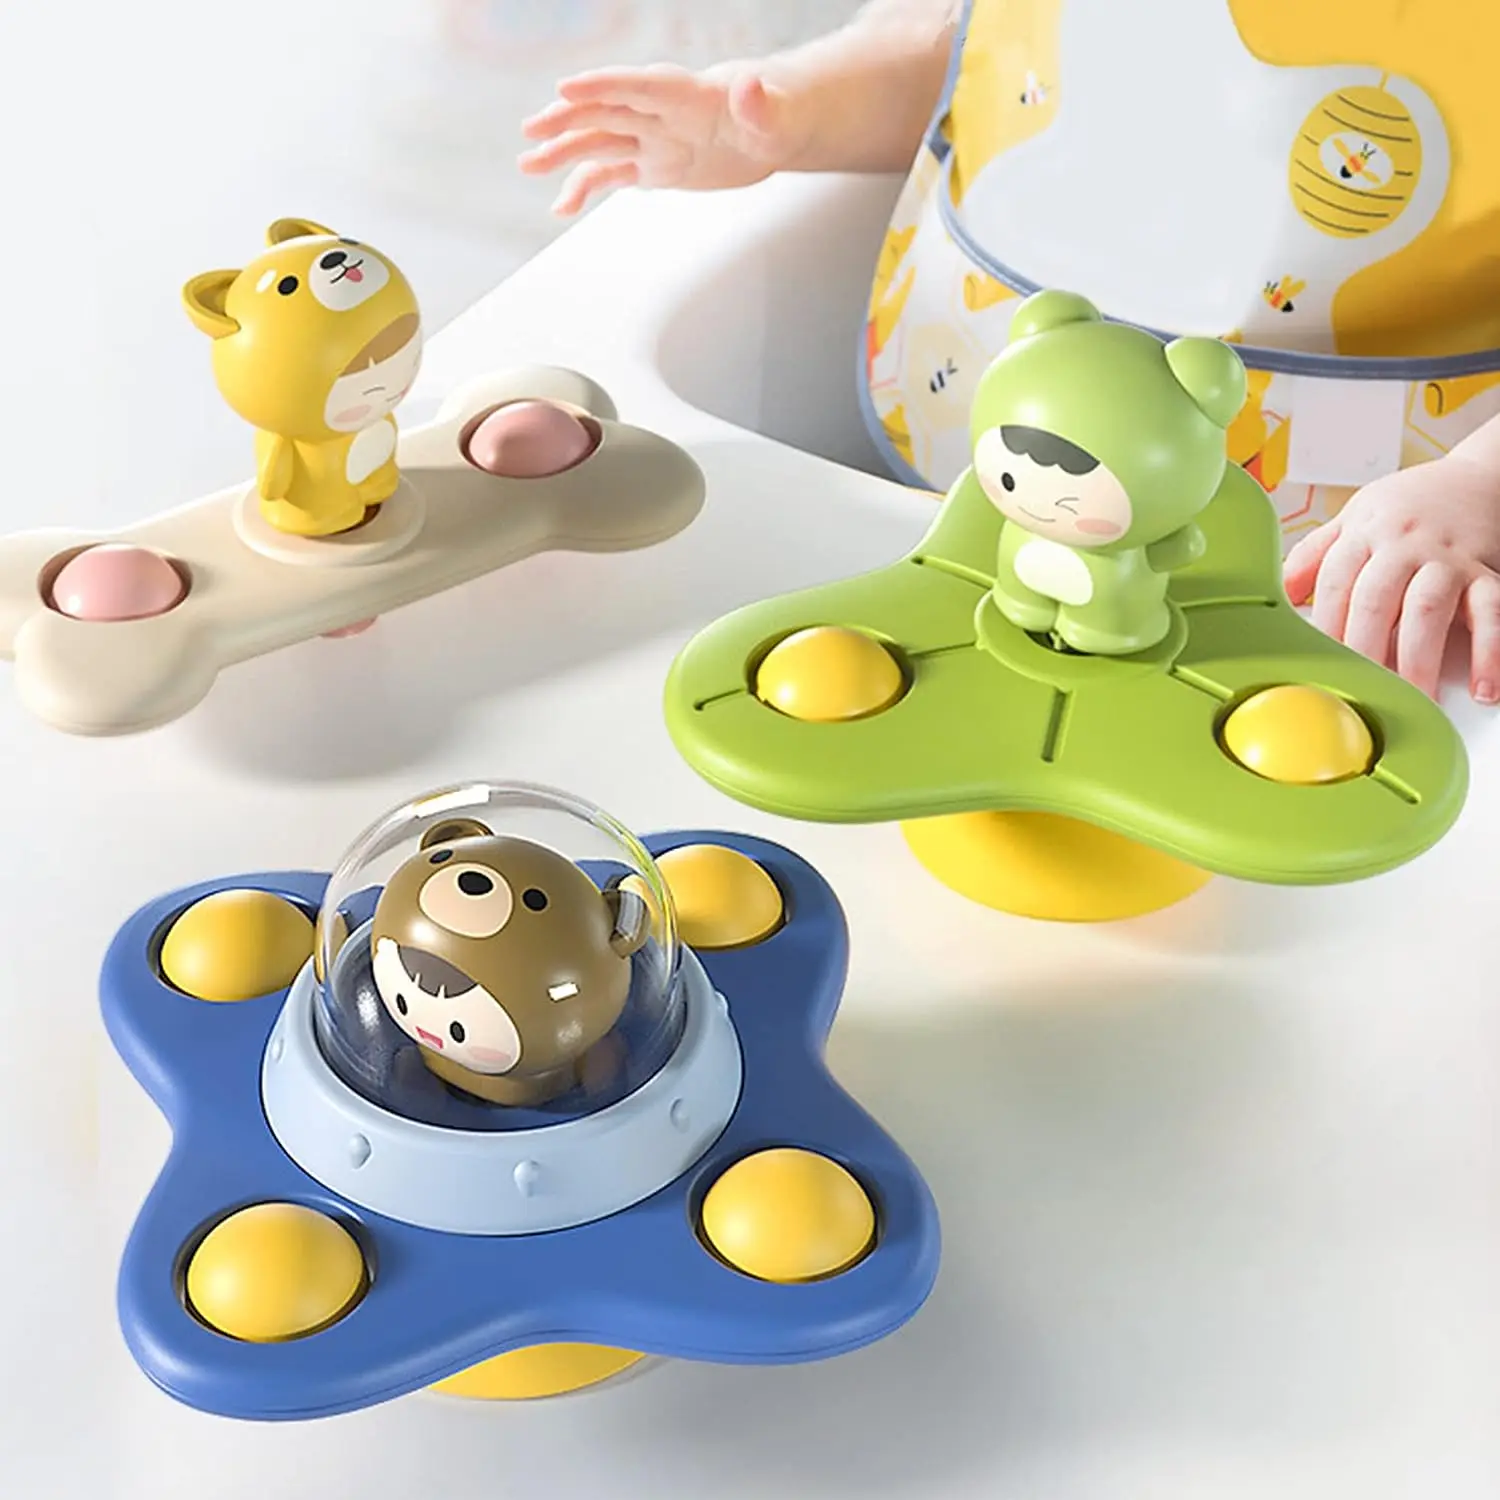 

Baby Toys Suction Cup Spinner Toy for Toddlers Fidget Spinner Stress Relief Baby Bath Rotating Rattles Sensory Montessori Toys